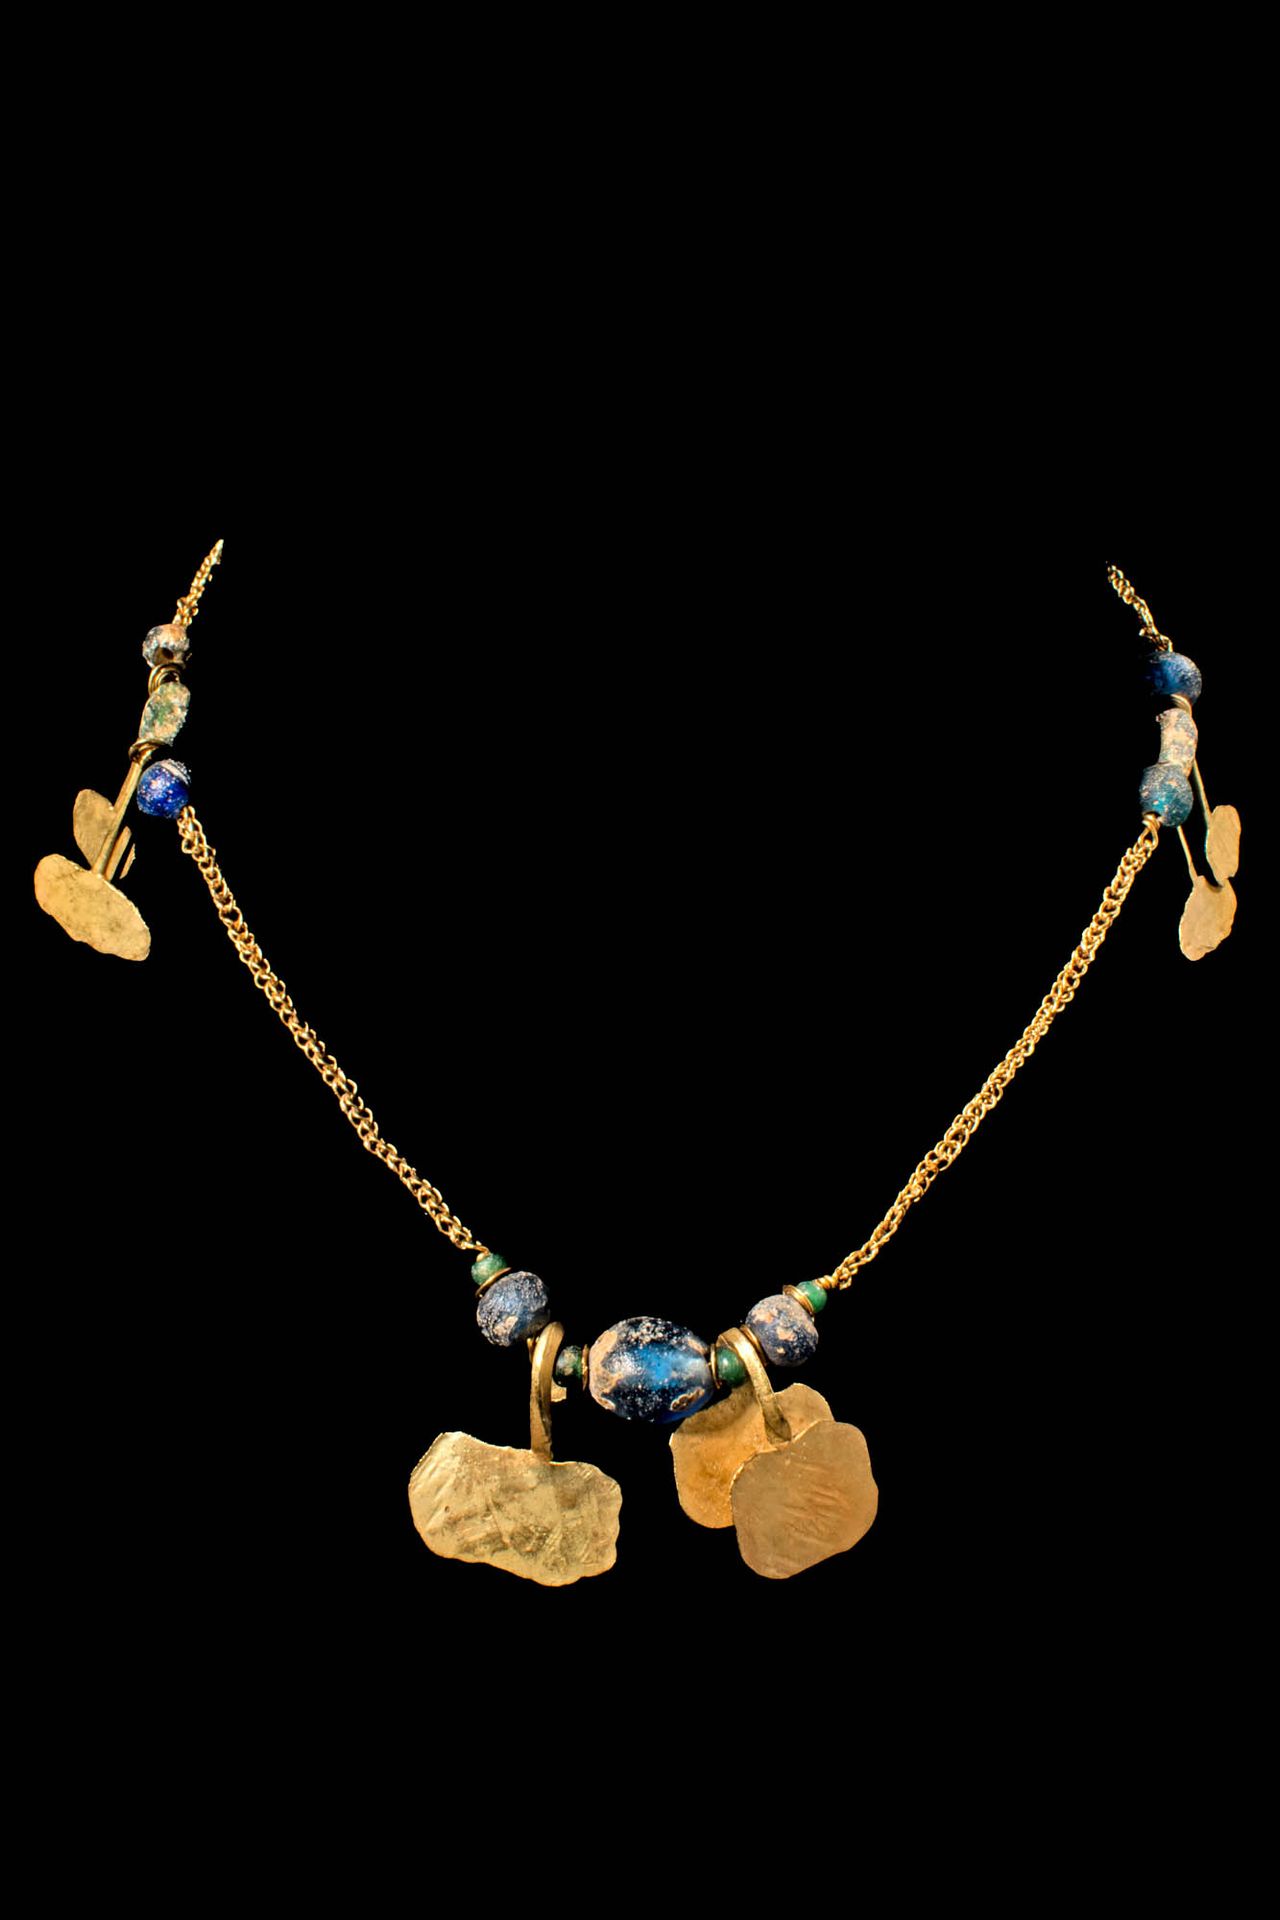 GOLD NECKLACE WITH EGYPTIAN GOLD PENDANTS AND BEADS Periodo tardío, Ca. 664 - 33&hellip;